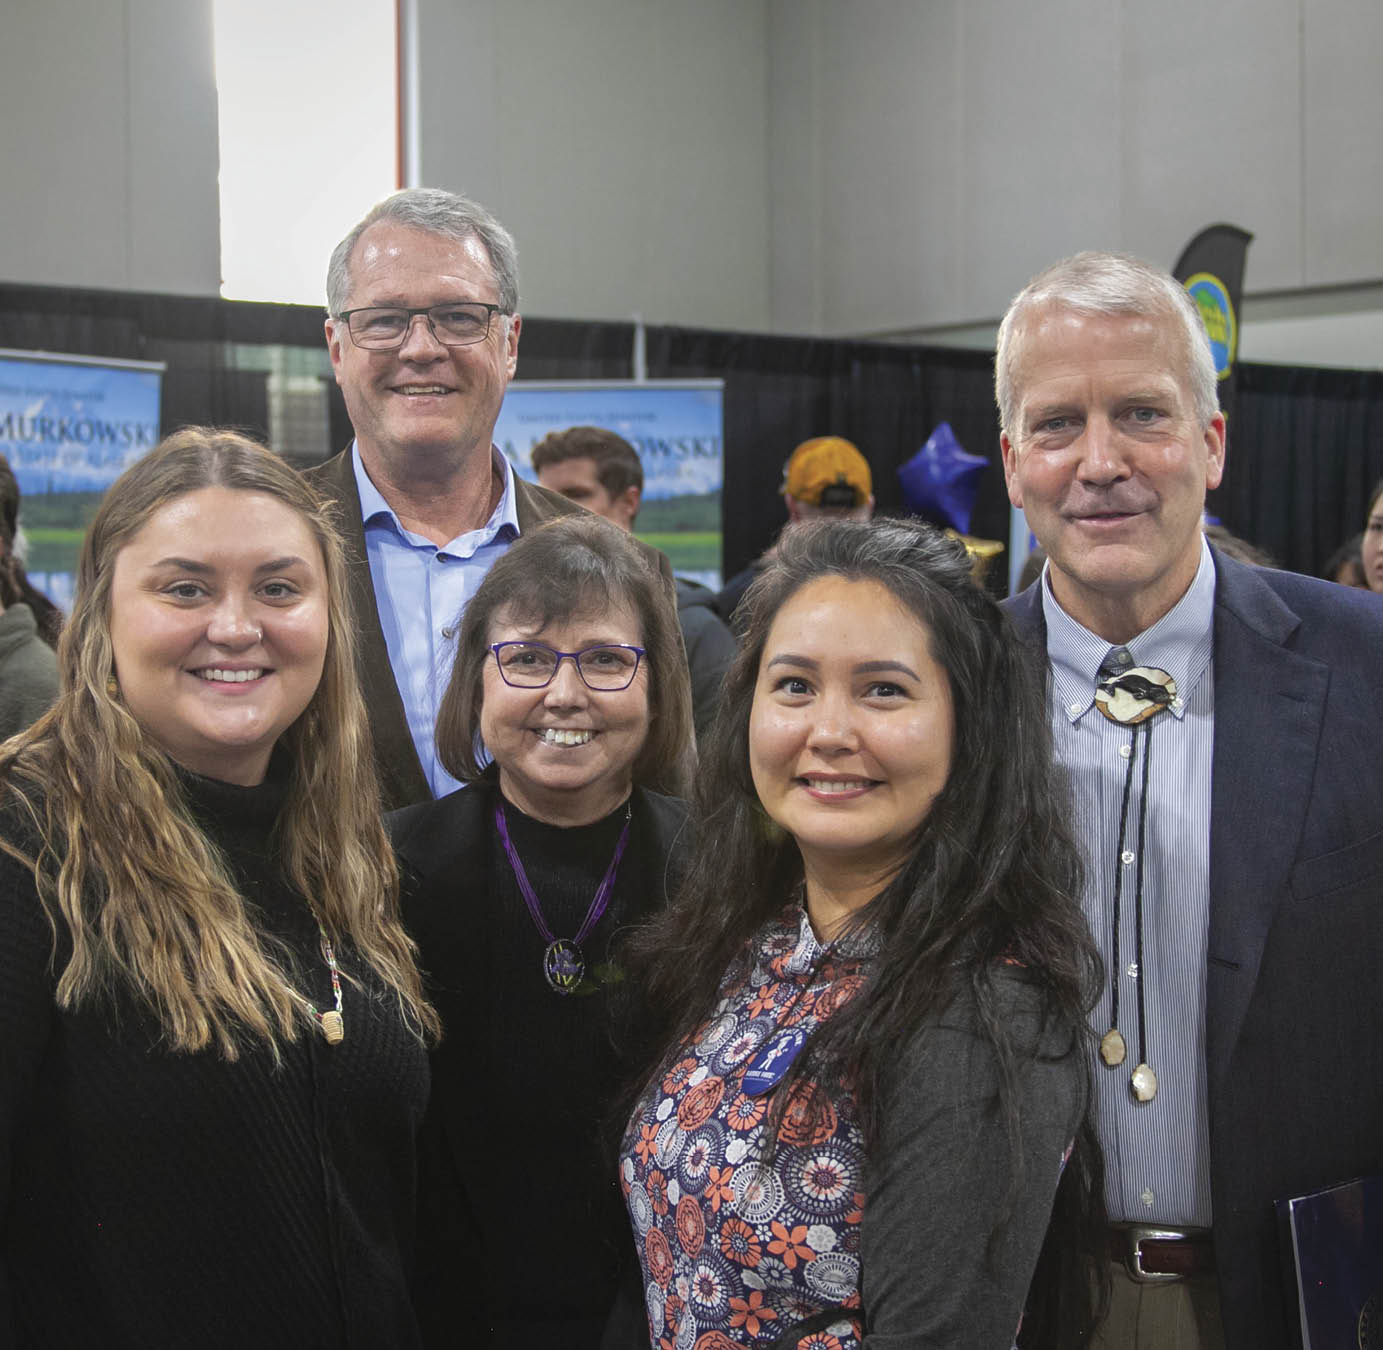 Representing the program at the AFN convention. Pictured from left to right: Kalani Tucker of Southcentral Foundation (a past graduate); John Nofsinger, Dean of the UAA College of Business and Public Policy; Sharon Lind; Francine Moreno of Alaska Native Tribal Health Consortium (a past graduate); and US Senator Dan Sullivan. Sharon Lind